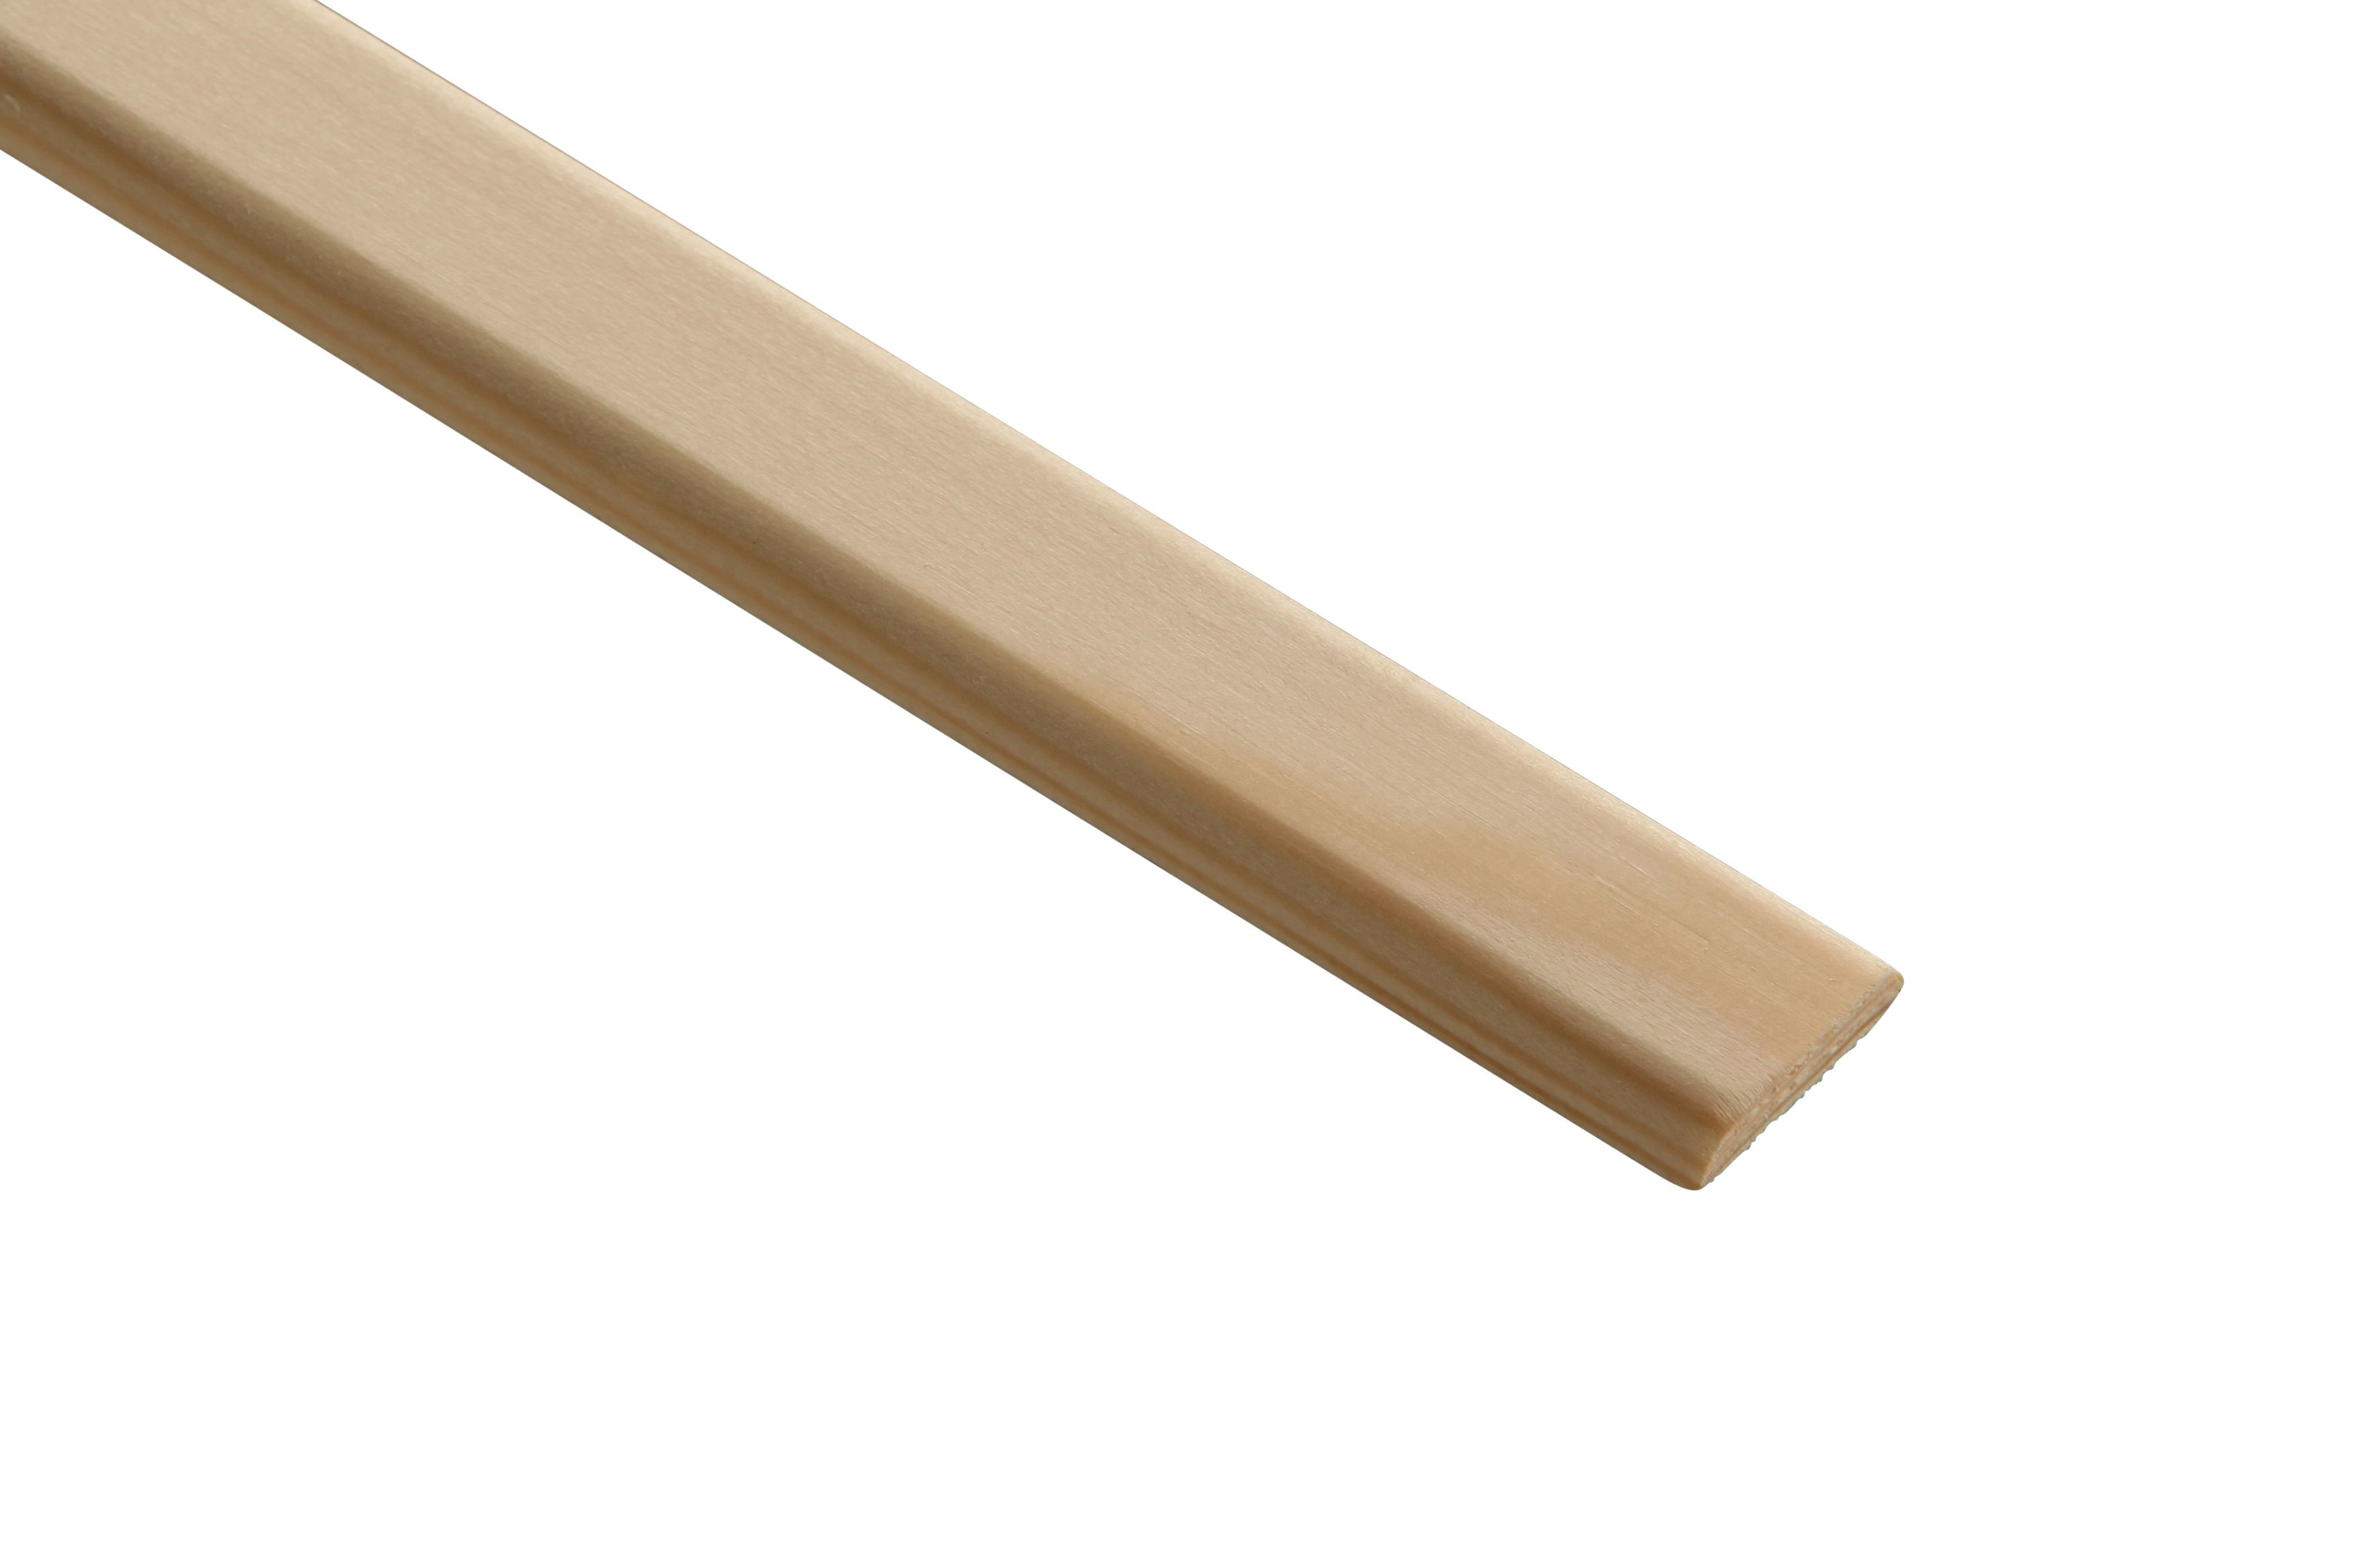 Image of Wickes Pine D-shape Moulding - 21 x 4 x 2400mm